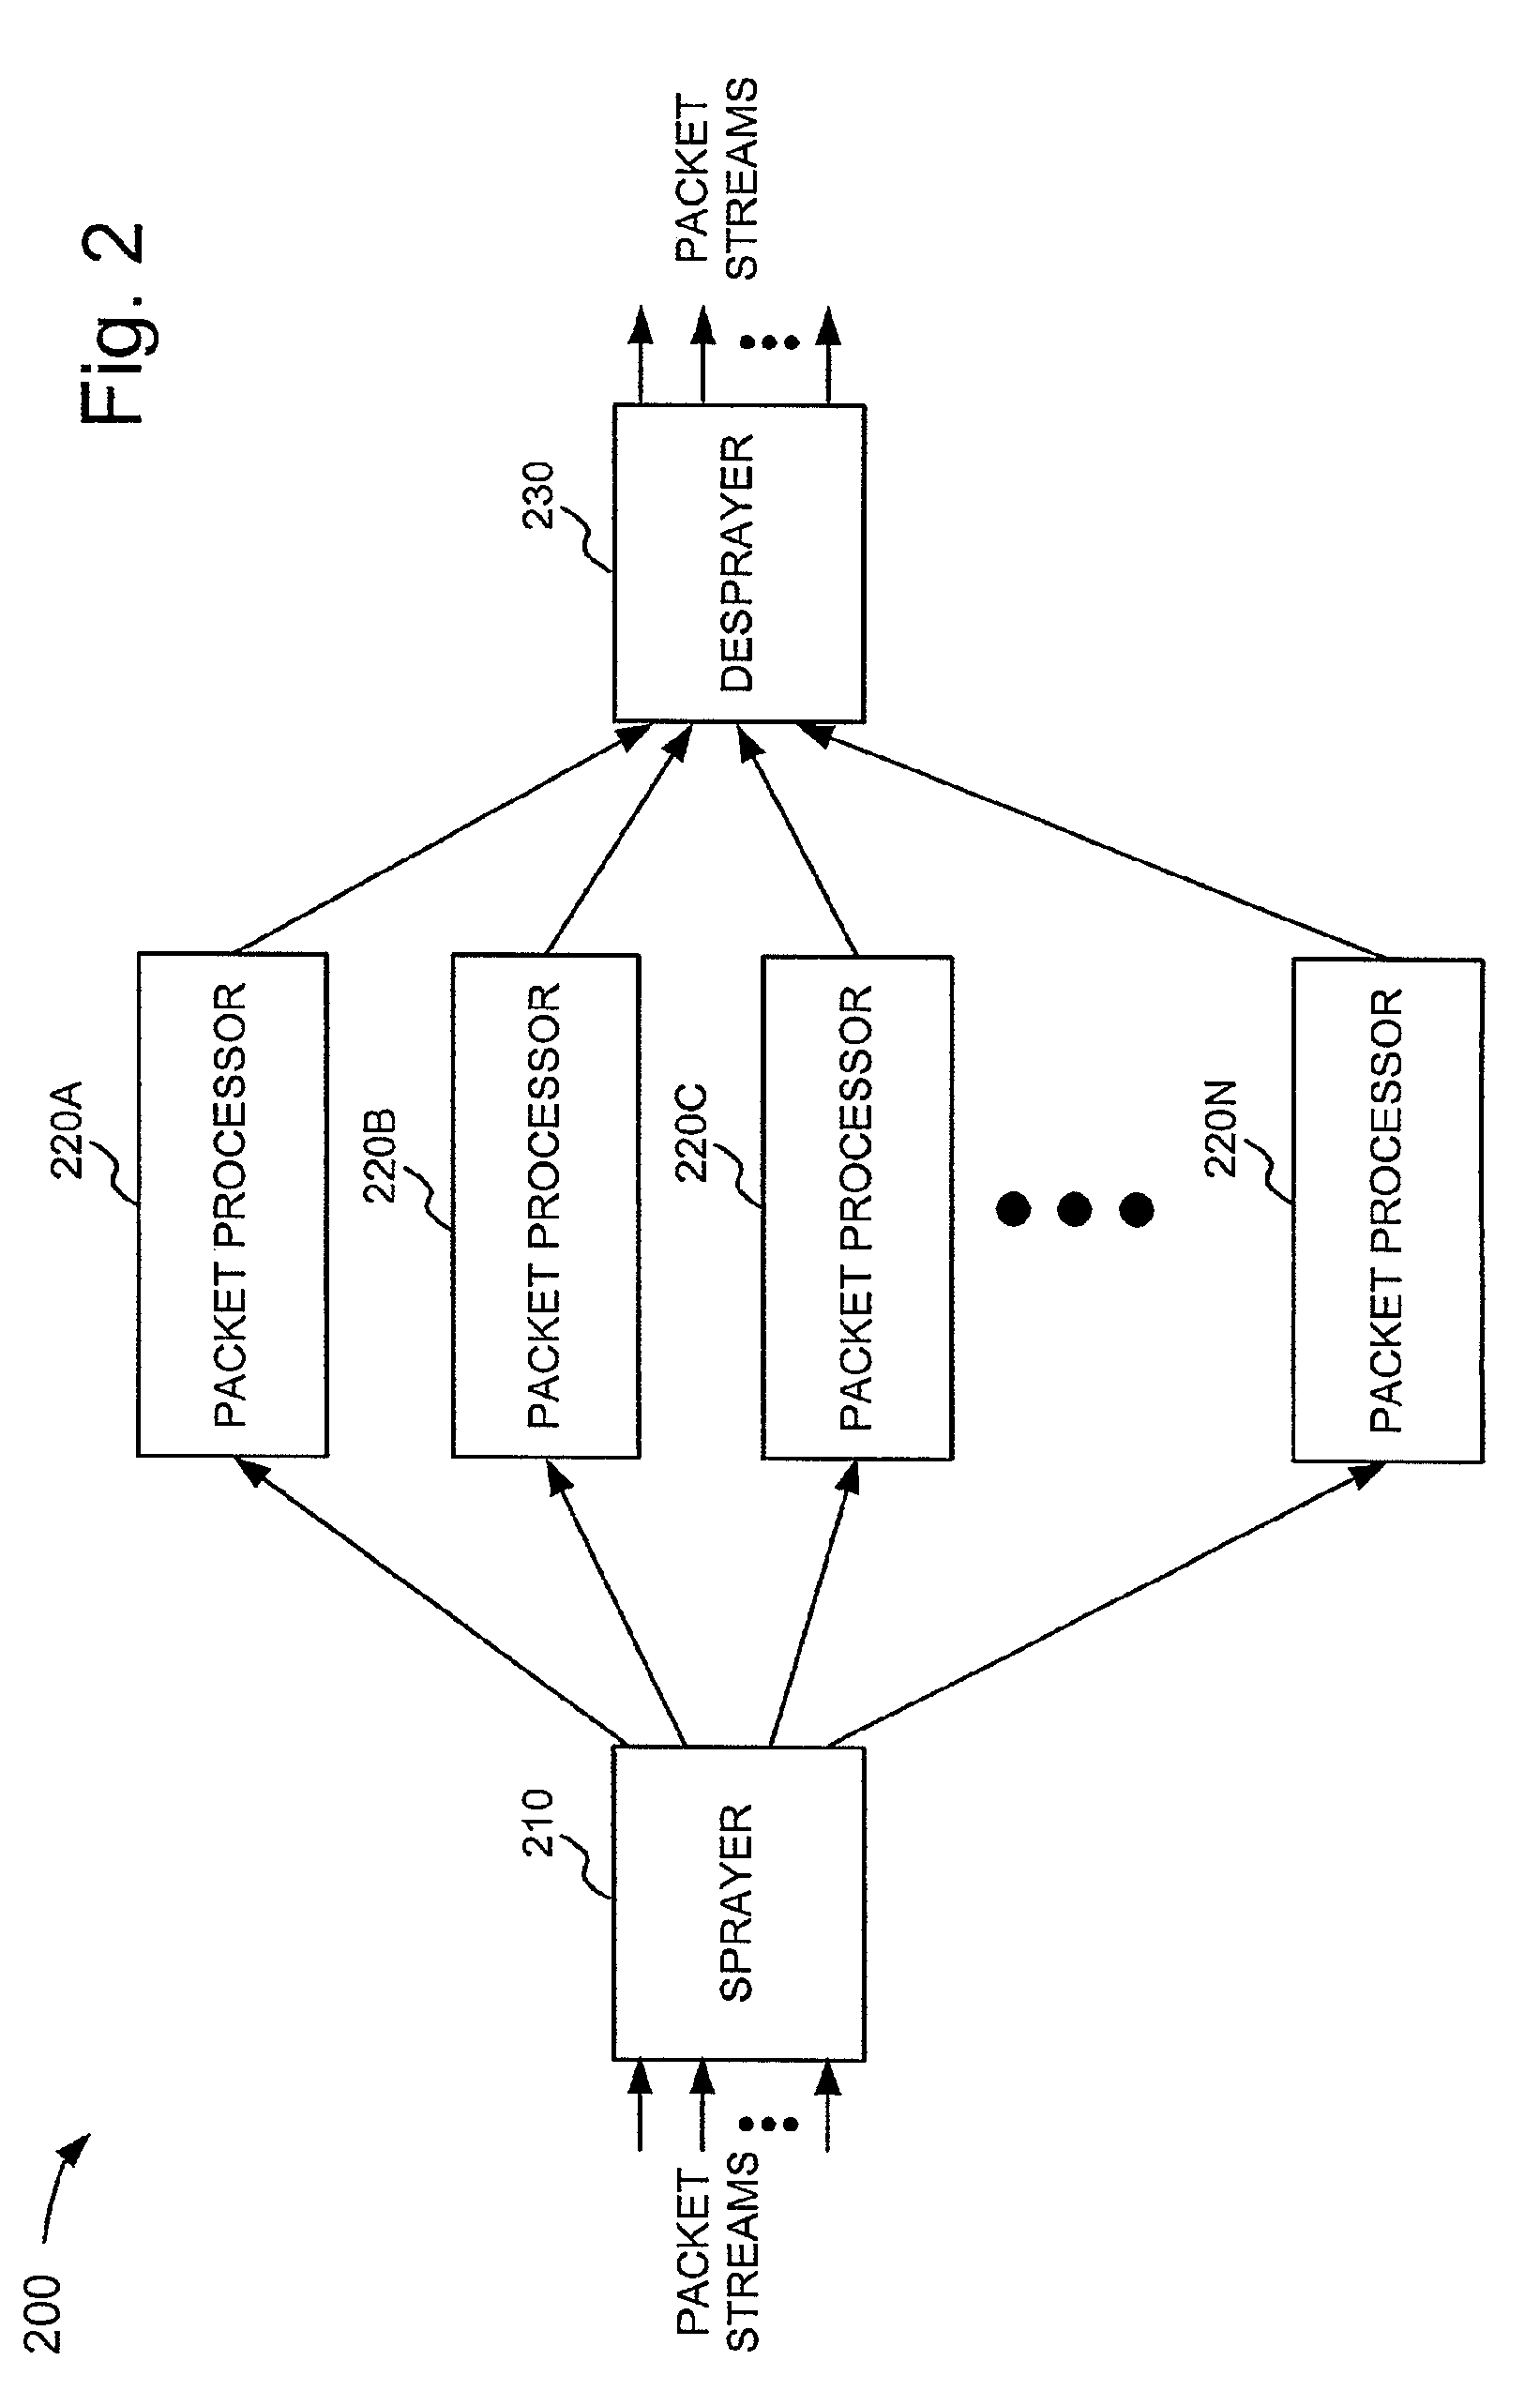 Packet spraying for load balancing across multiple packet processors